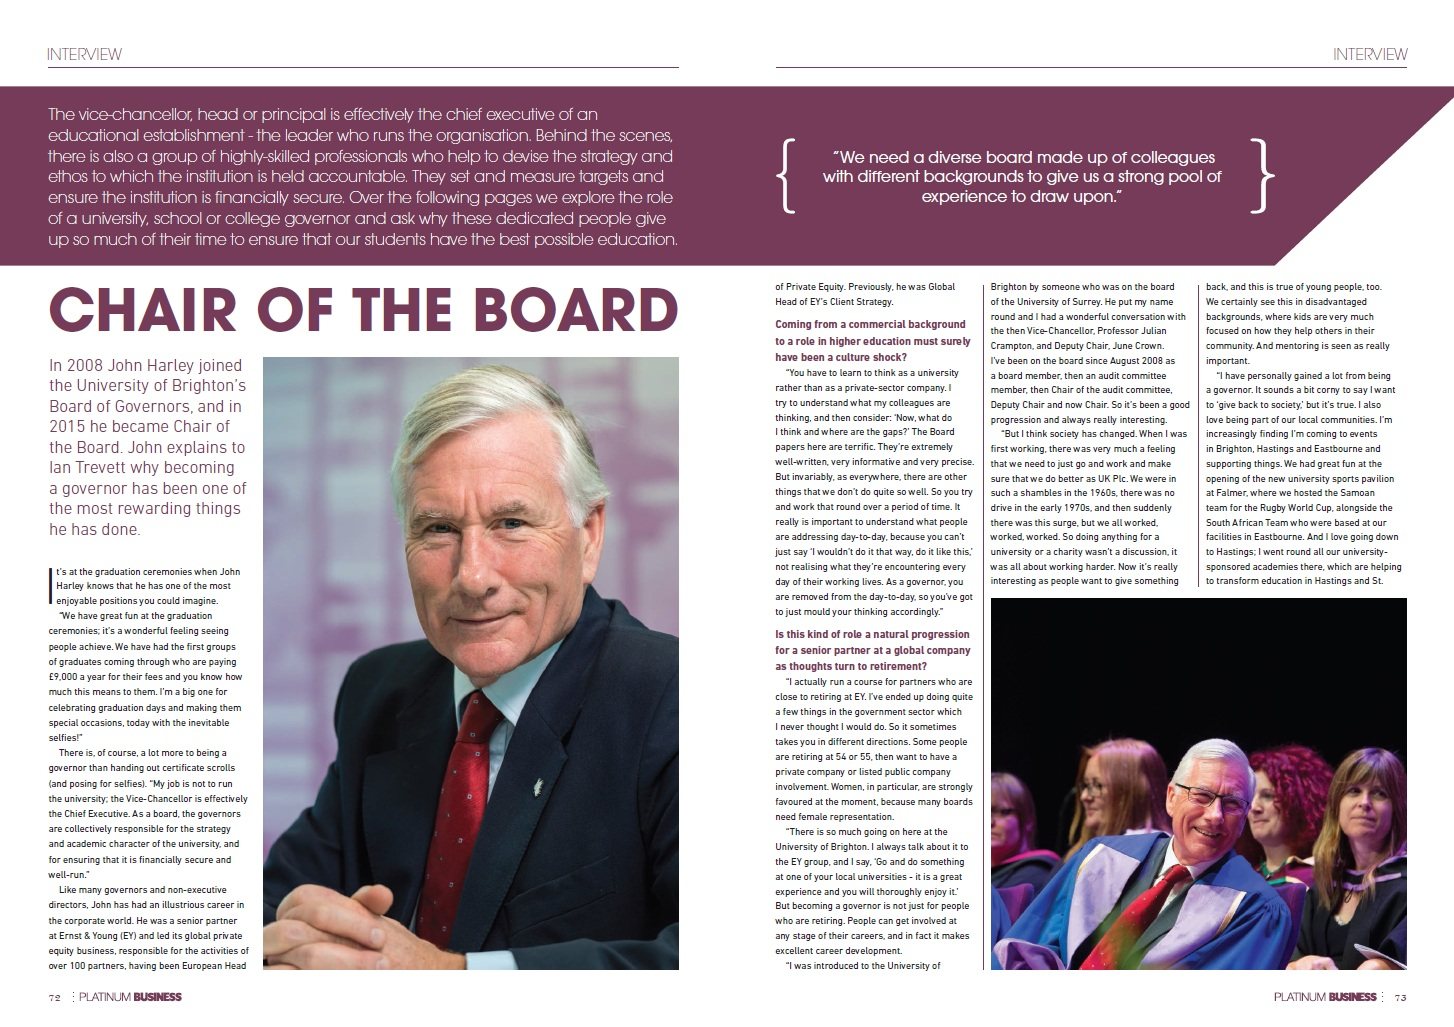 John Harley, Chair of the Board article in Platinum Business Magazine